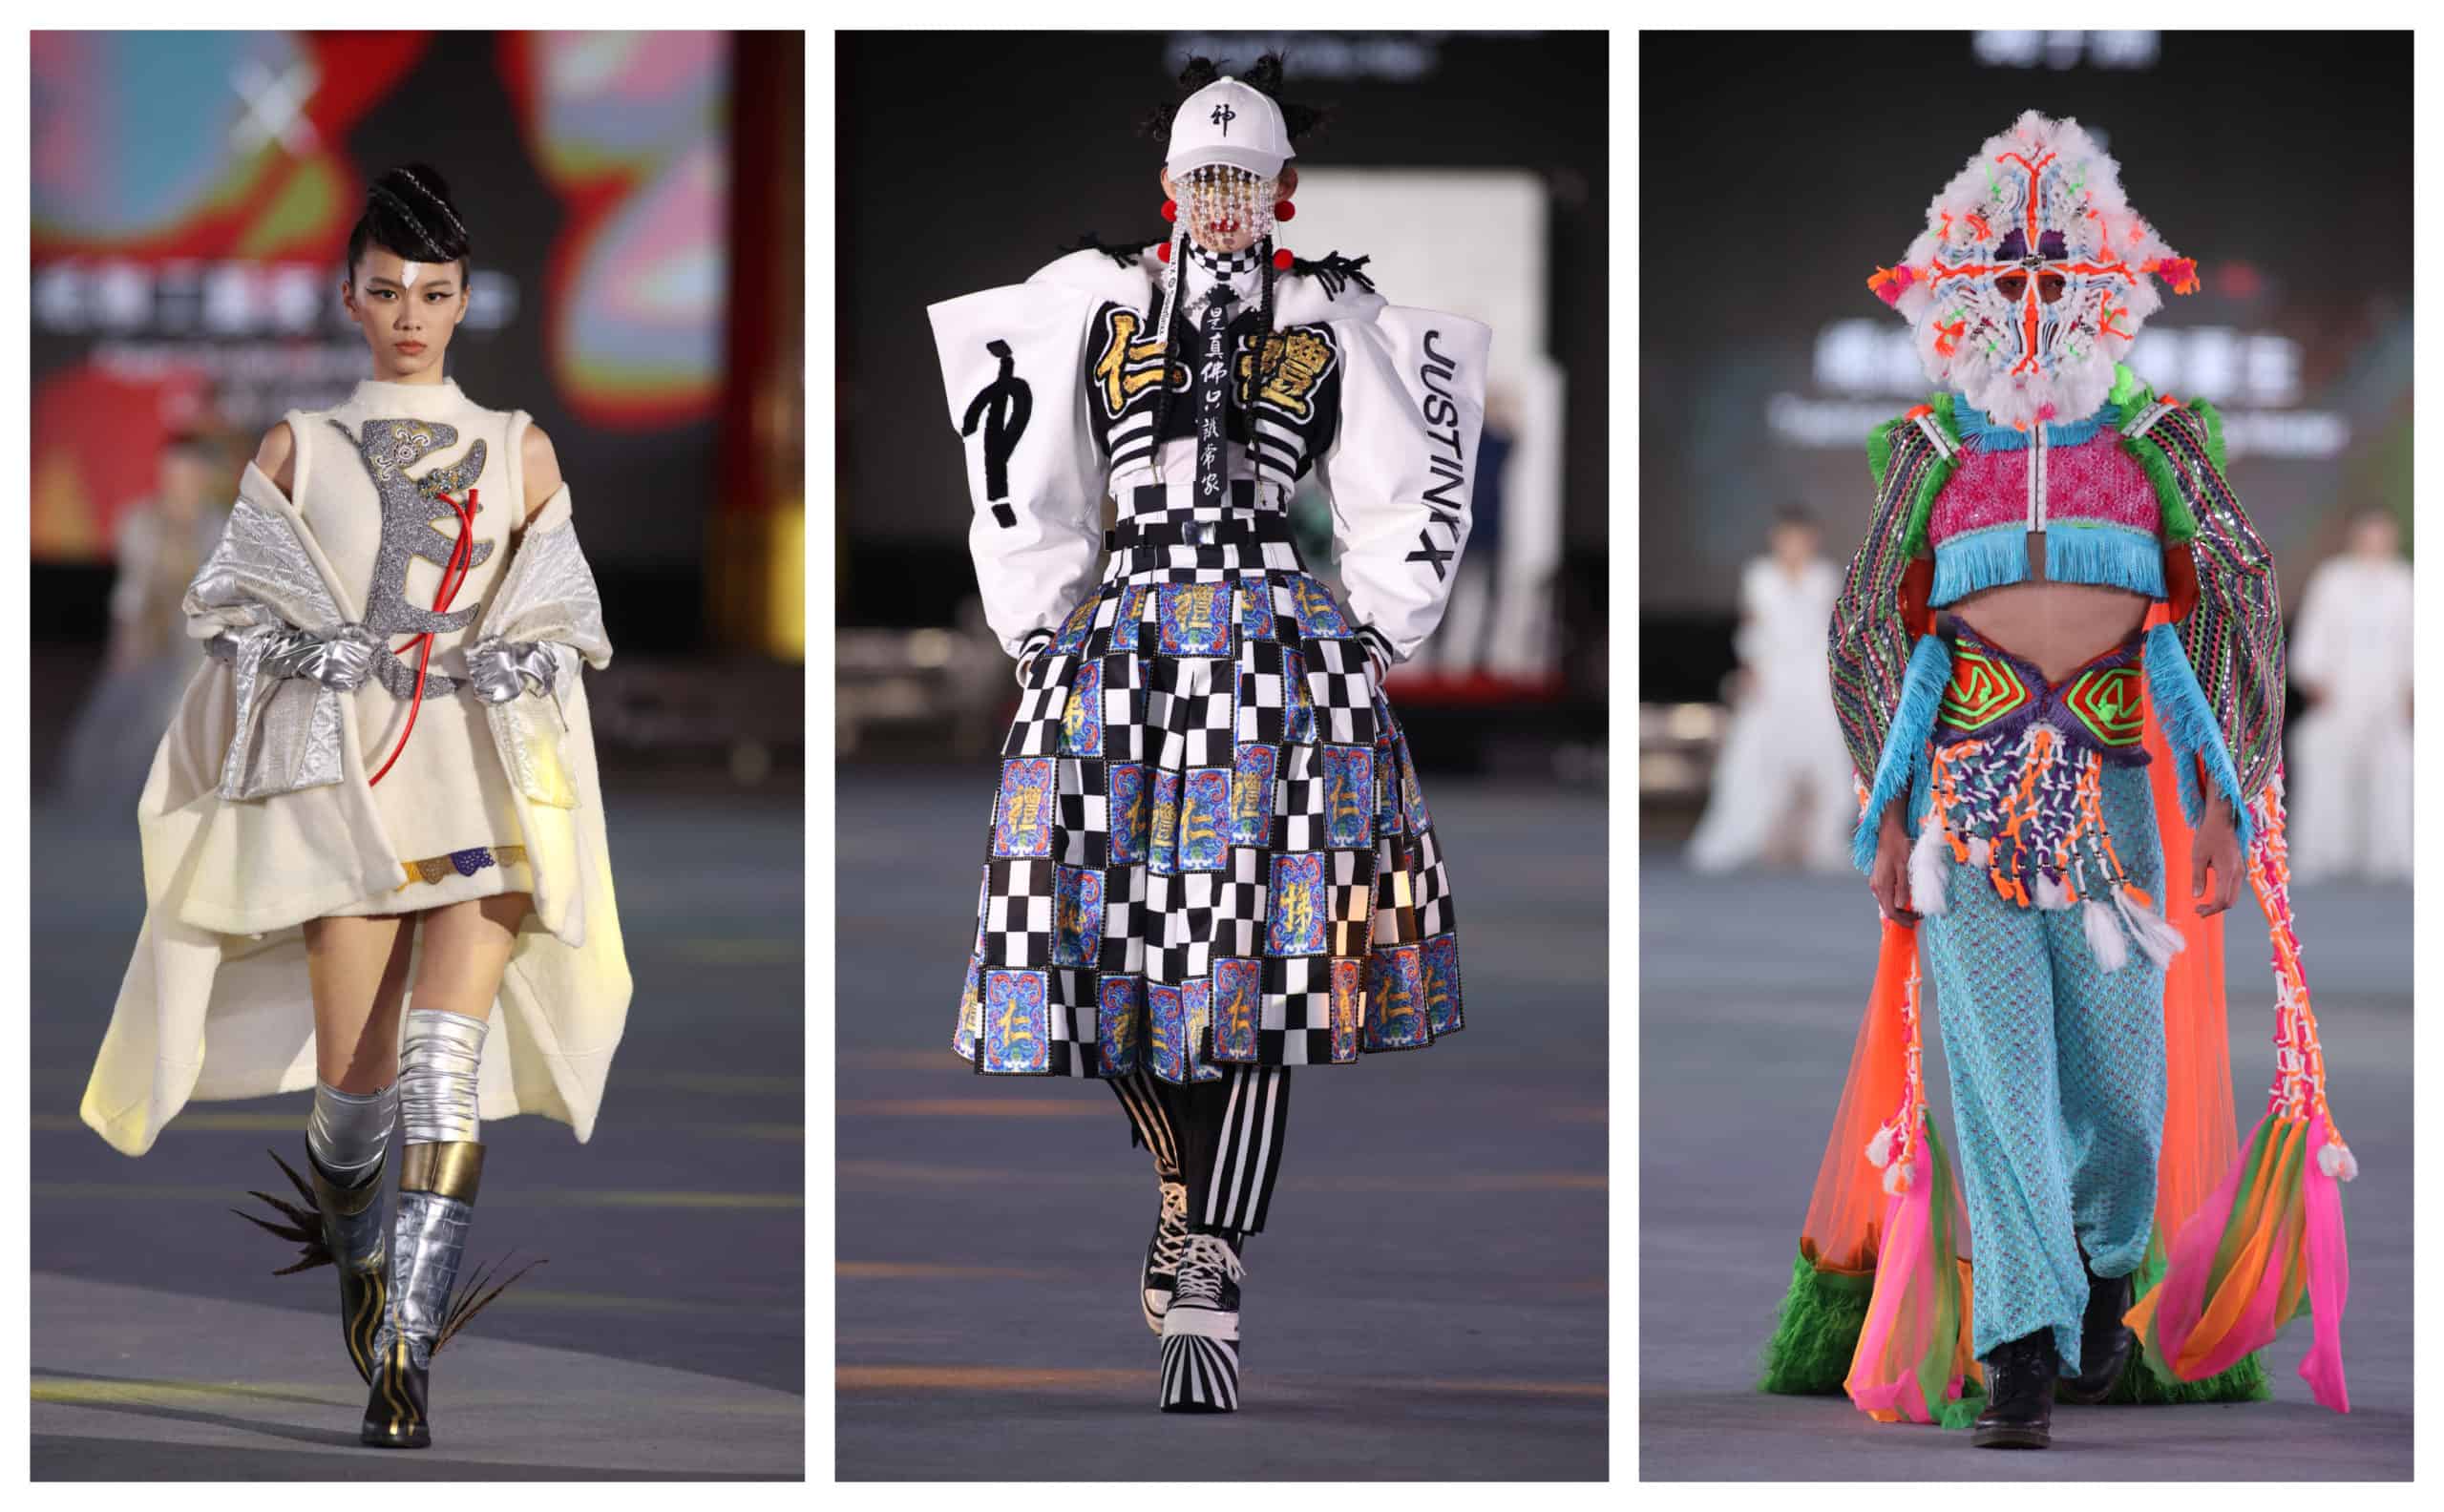 Taipei Fashion Week Brings Designers and Traditional Craftsman and Performing Artists Together